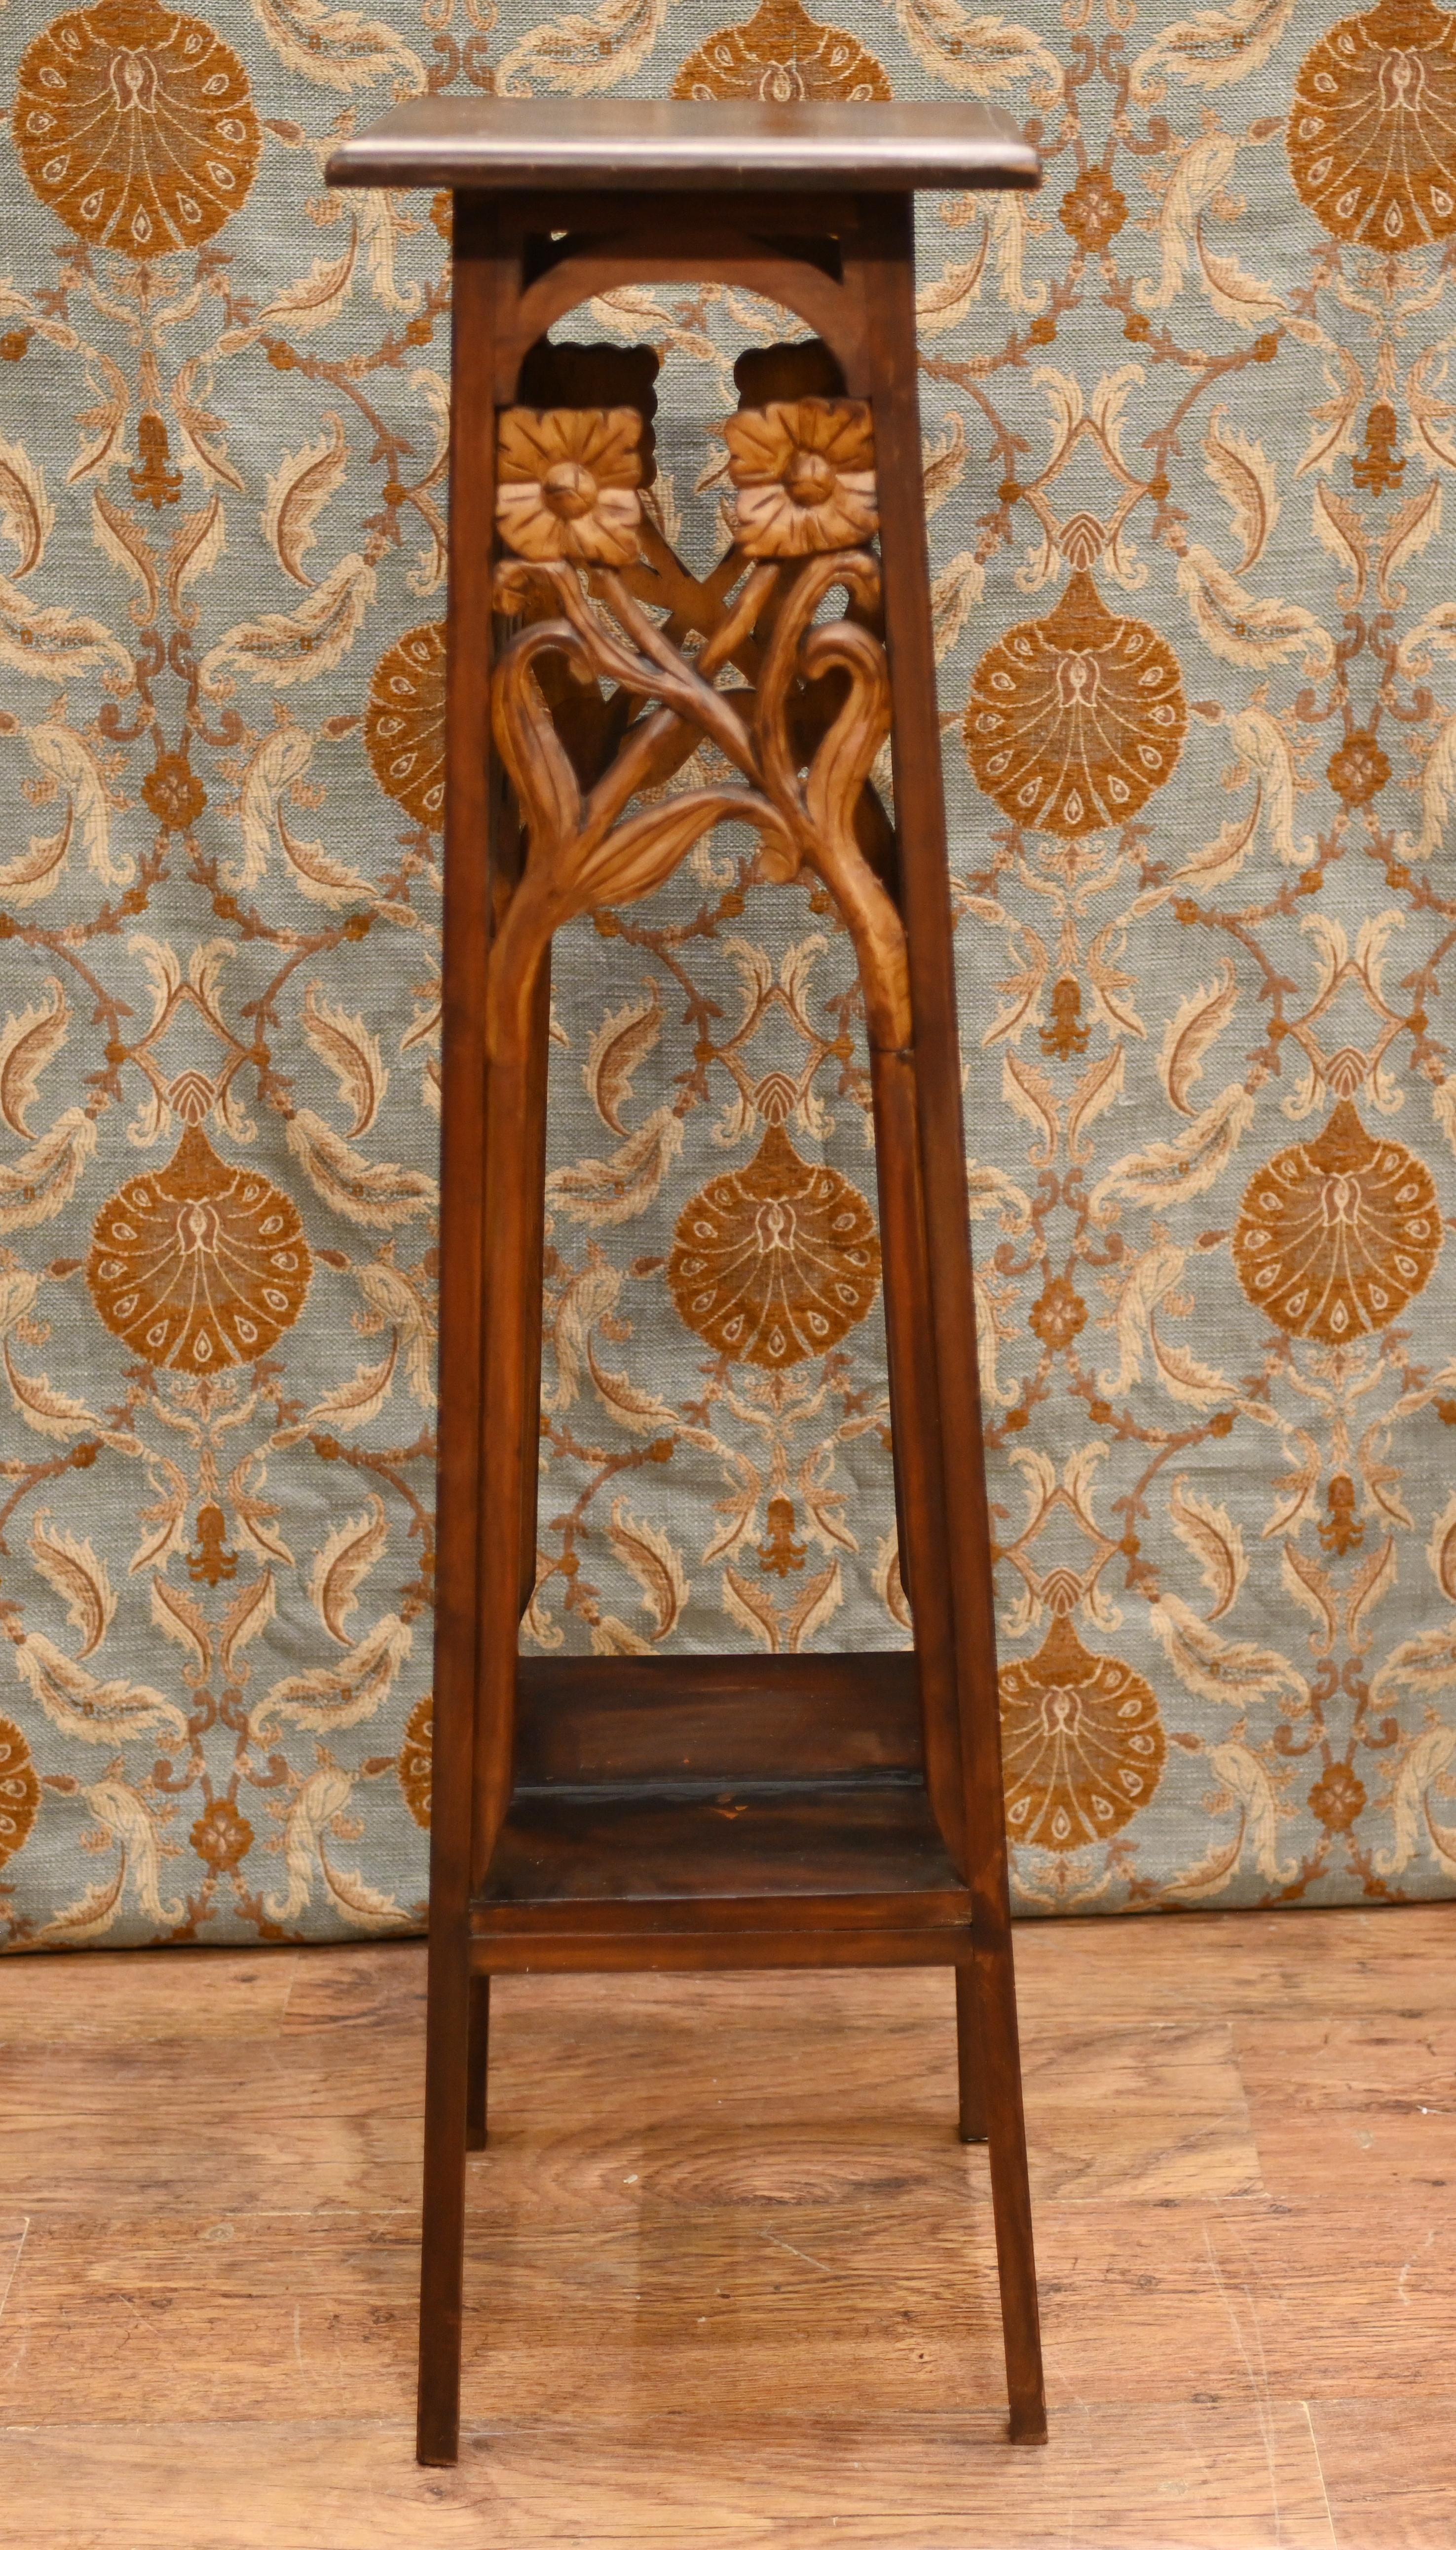 Art nouveau plant stand circa 1910 
Great for displaying decorative pieces such as busts, vases and plants
Please get in touch for shipping, we can get these to anywhere in the world
Please let us know if you would like to view this piece in our